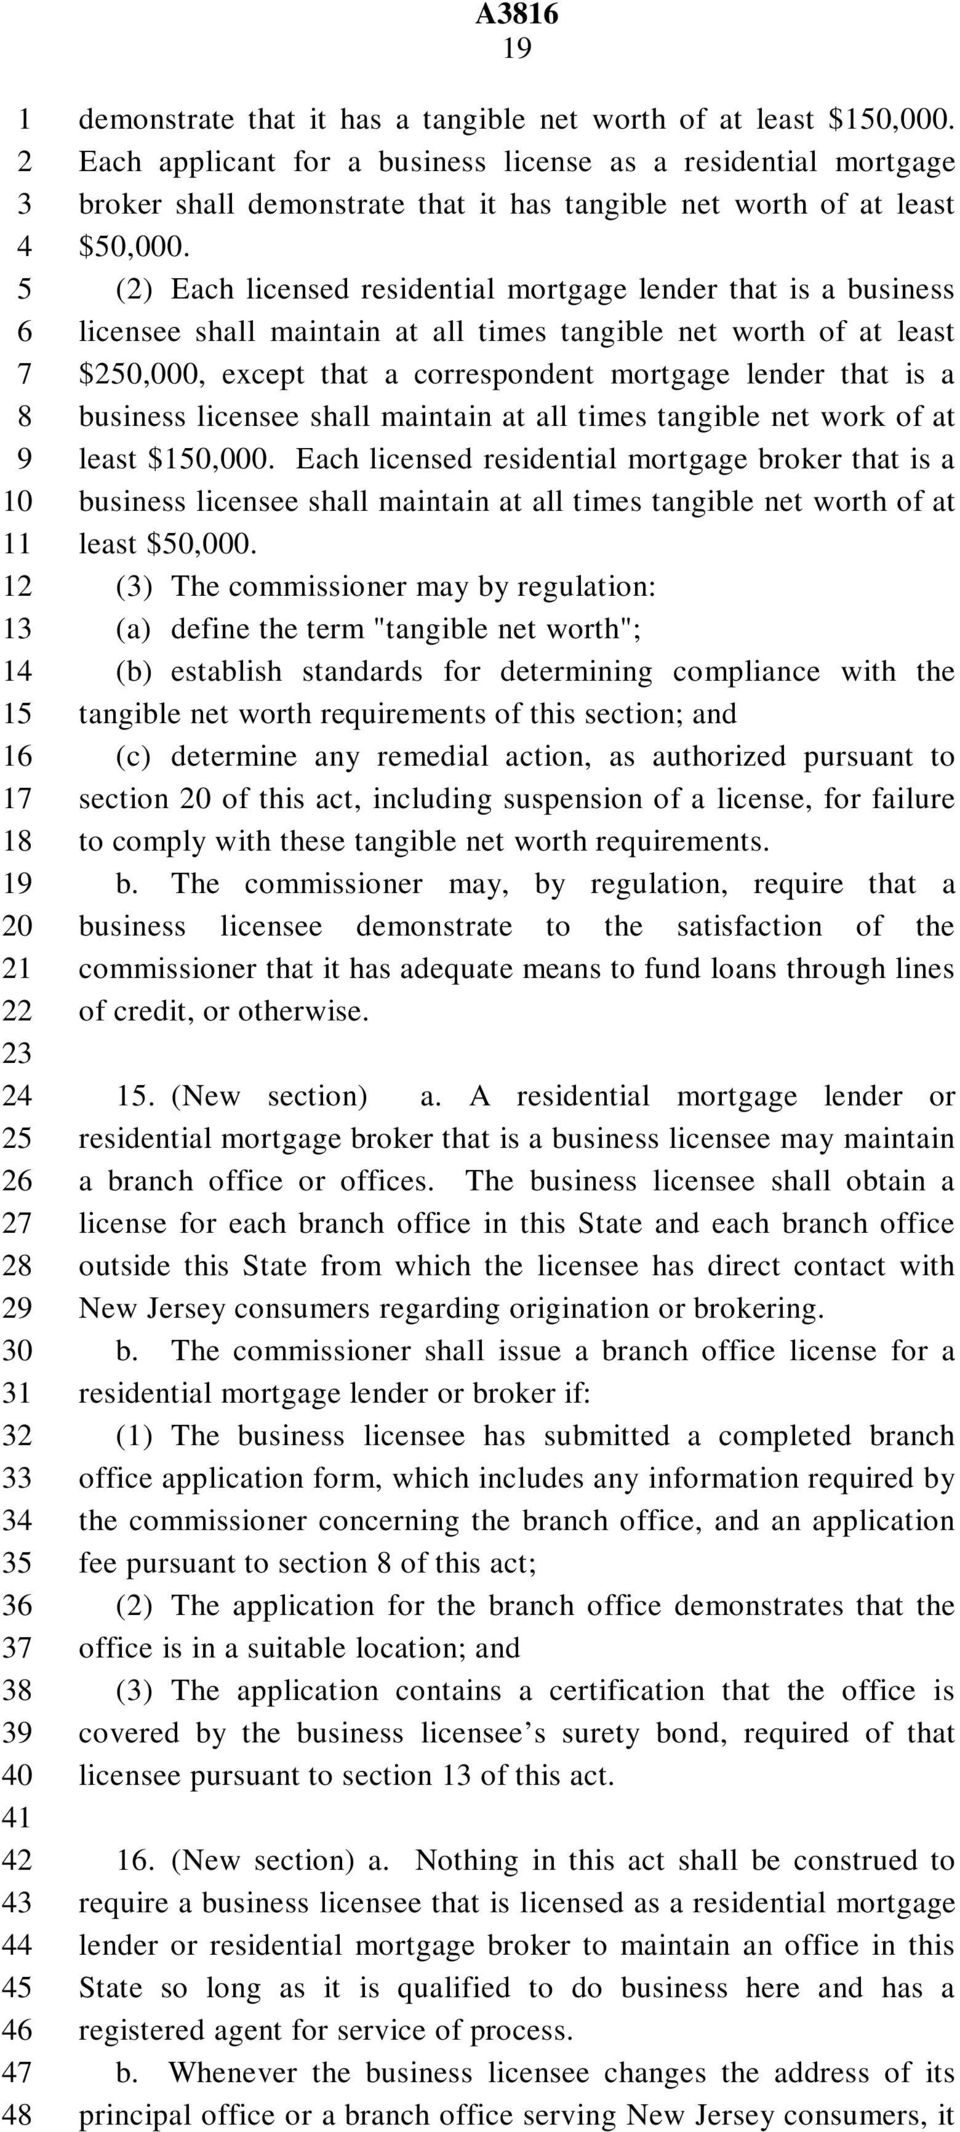 () Each licensed residential mortgage lender that is a business licensee shall maintain at all times tangible net worth of at least $0,000, except that a correspondent mortgage lender that is a